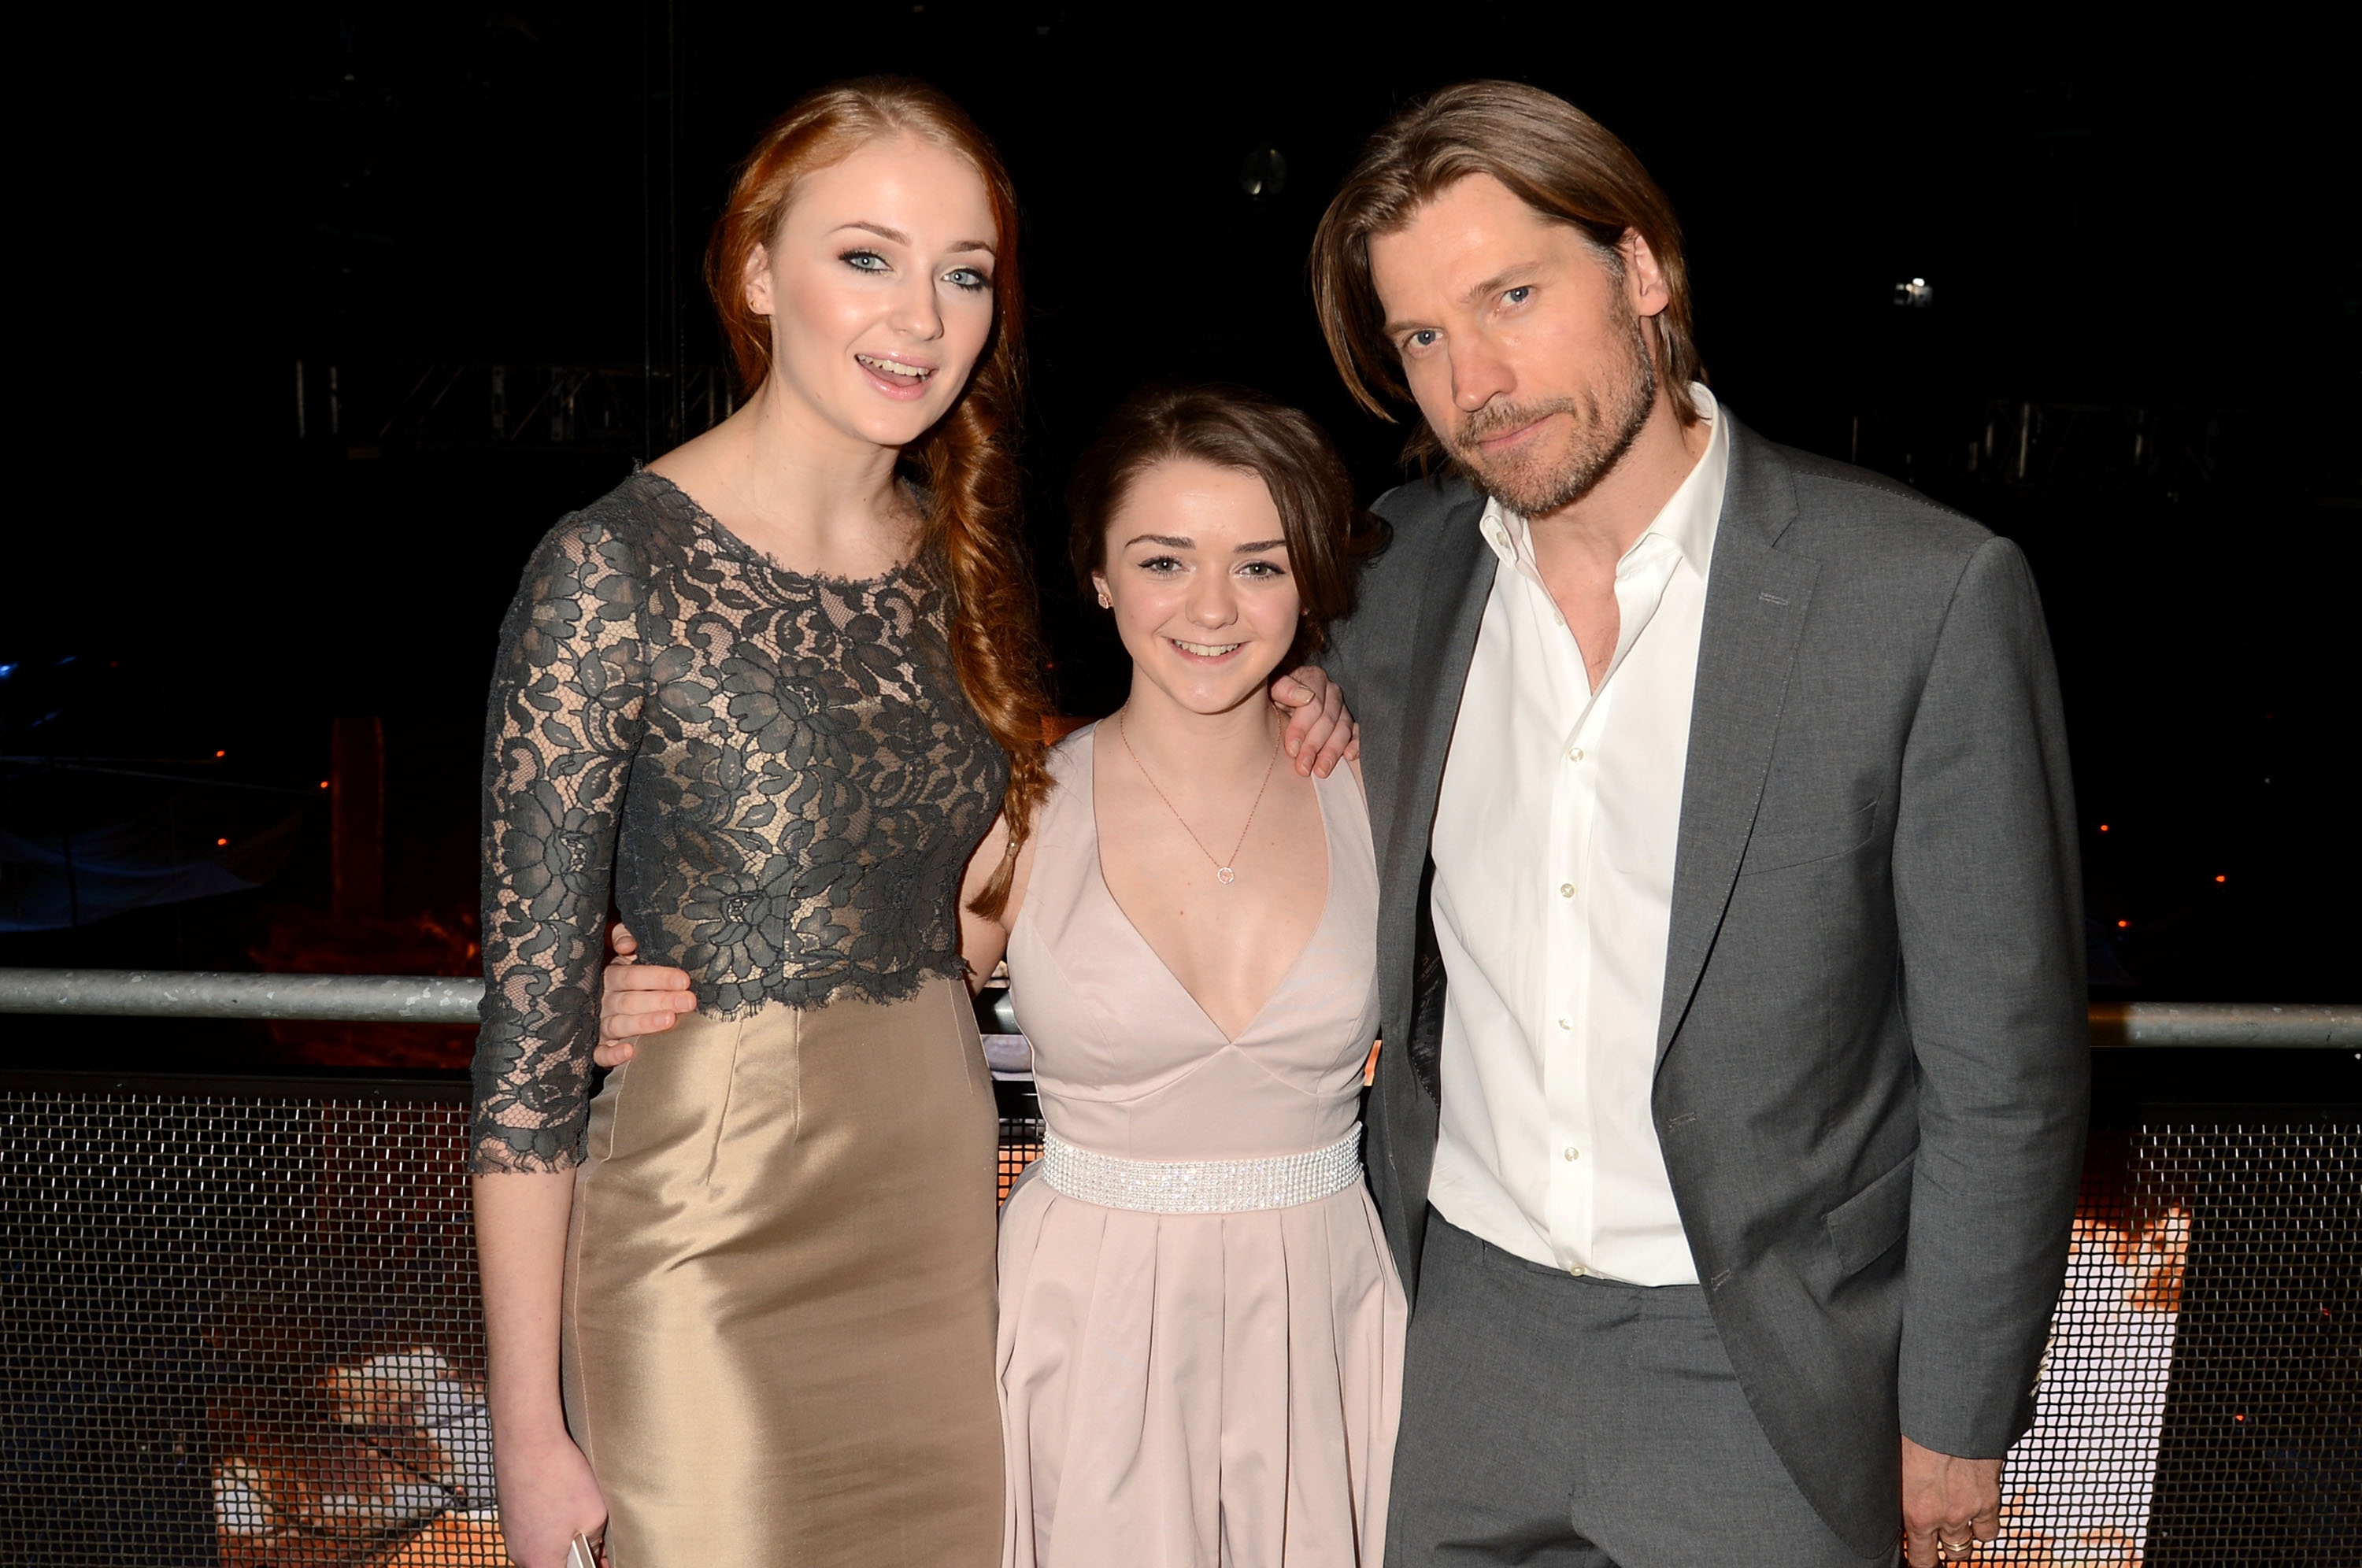 https://maisiewilliams.org/gallery/albums/Public Apperances/2013/March 21st-Game of Thrones Season 3 Seattle Premiere/0004.jpg